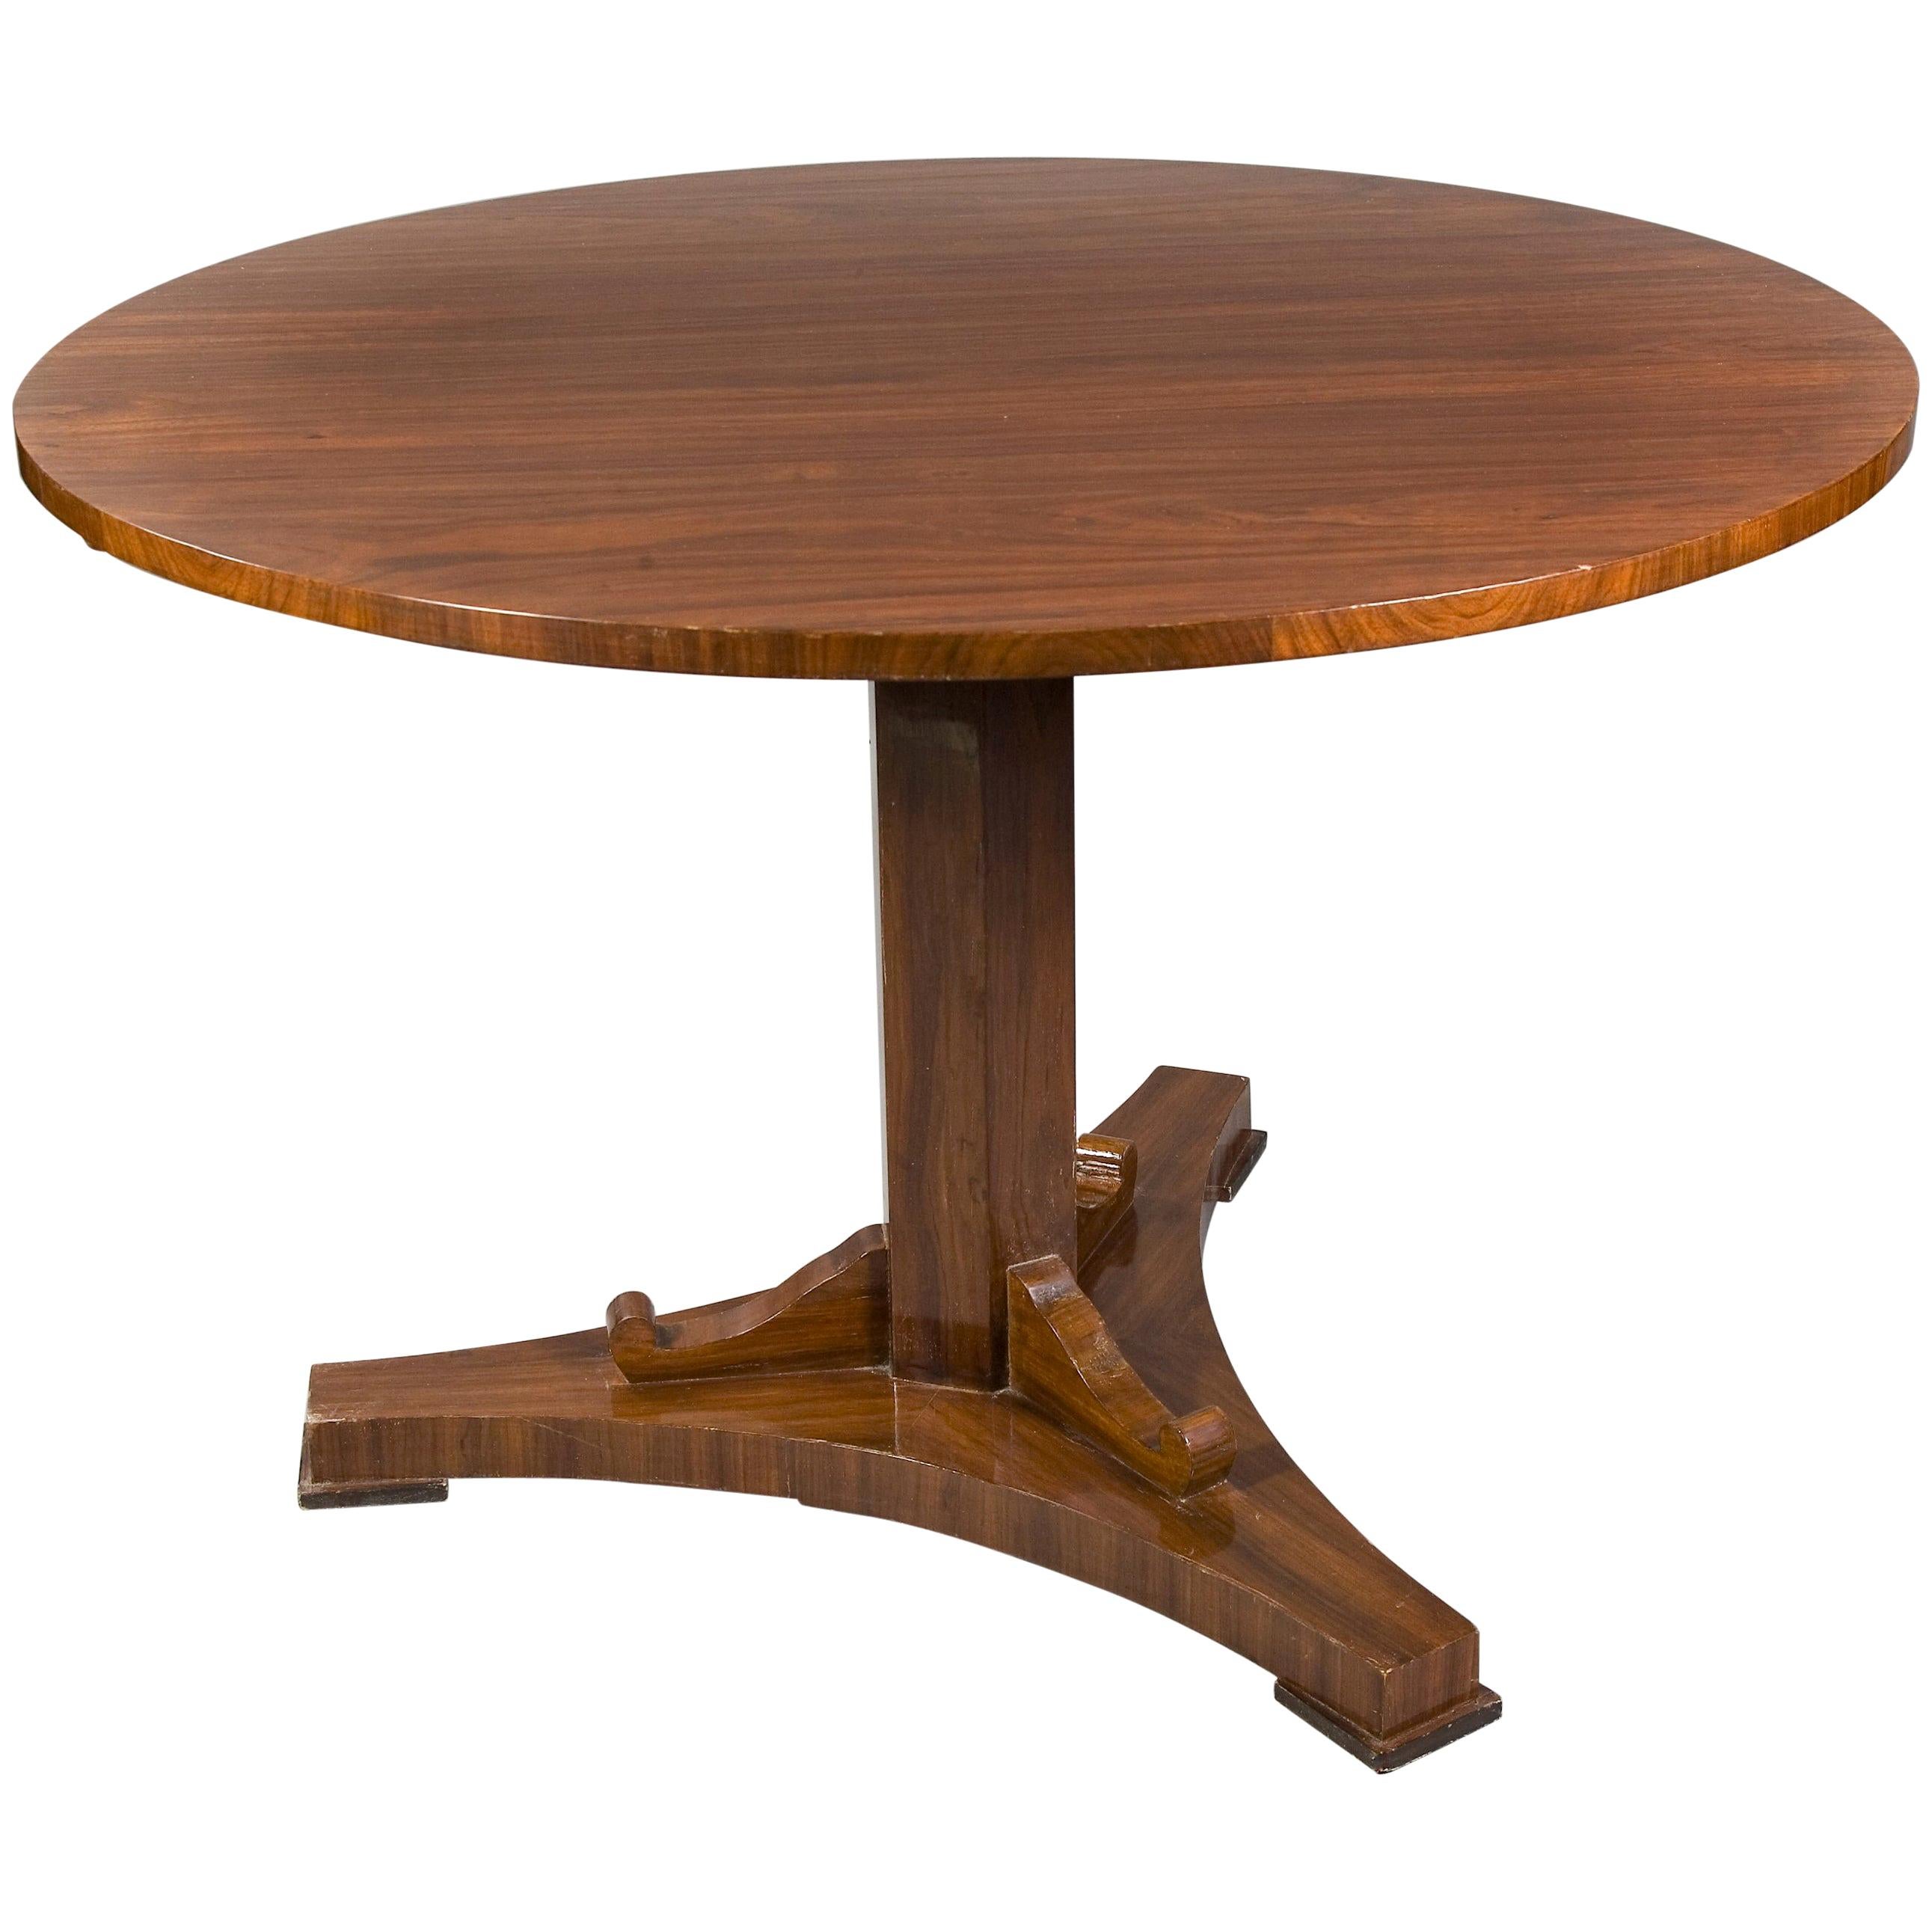 Classic Round Folding Table in Biedermeier Style, Mahogany Wood